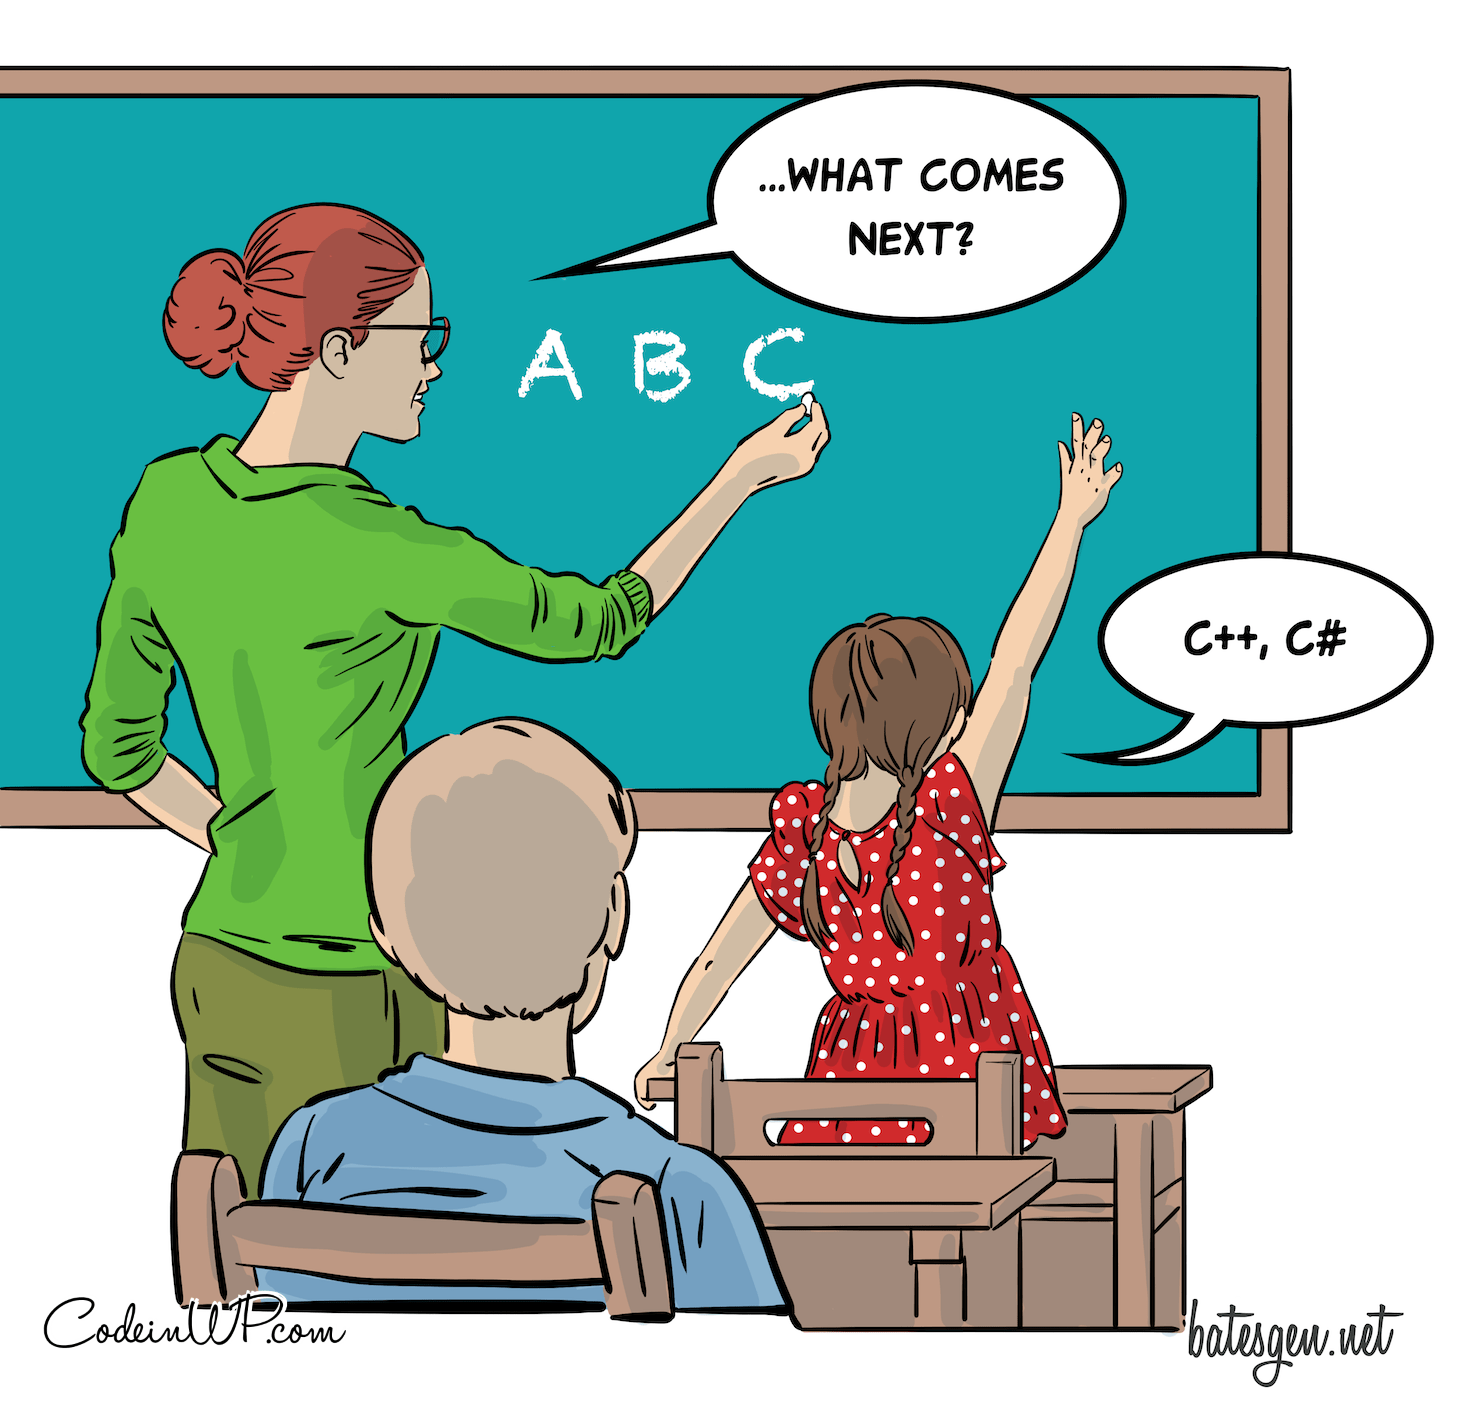 One of our favorite tech comics concerning the A,B,Cs of development